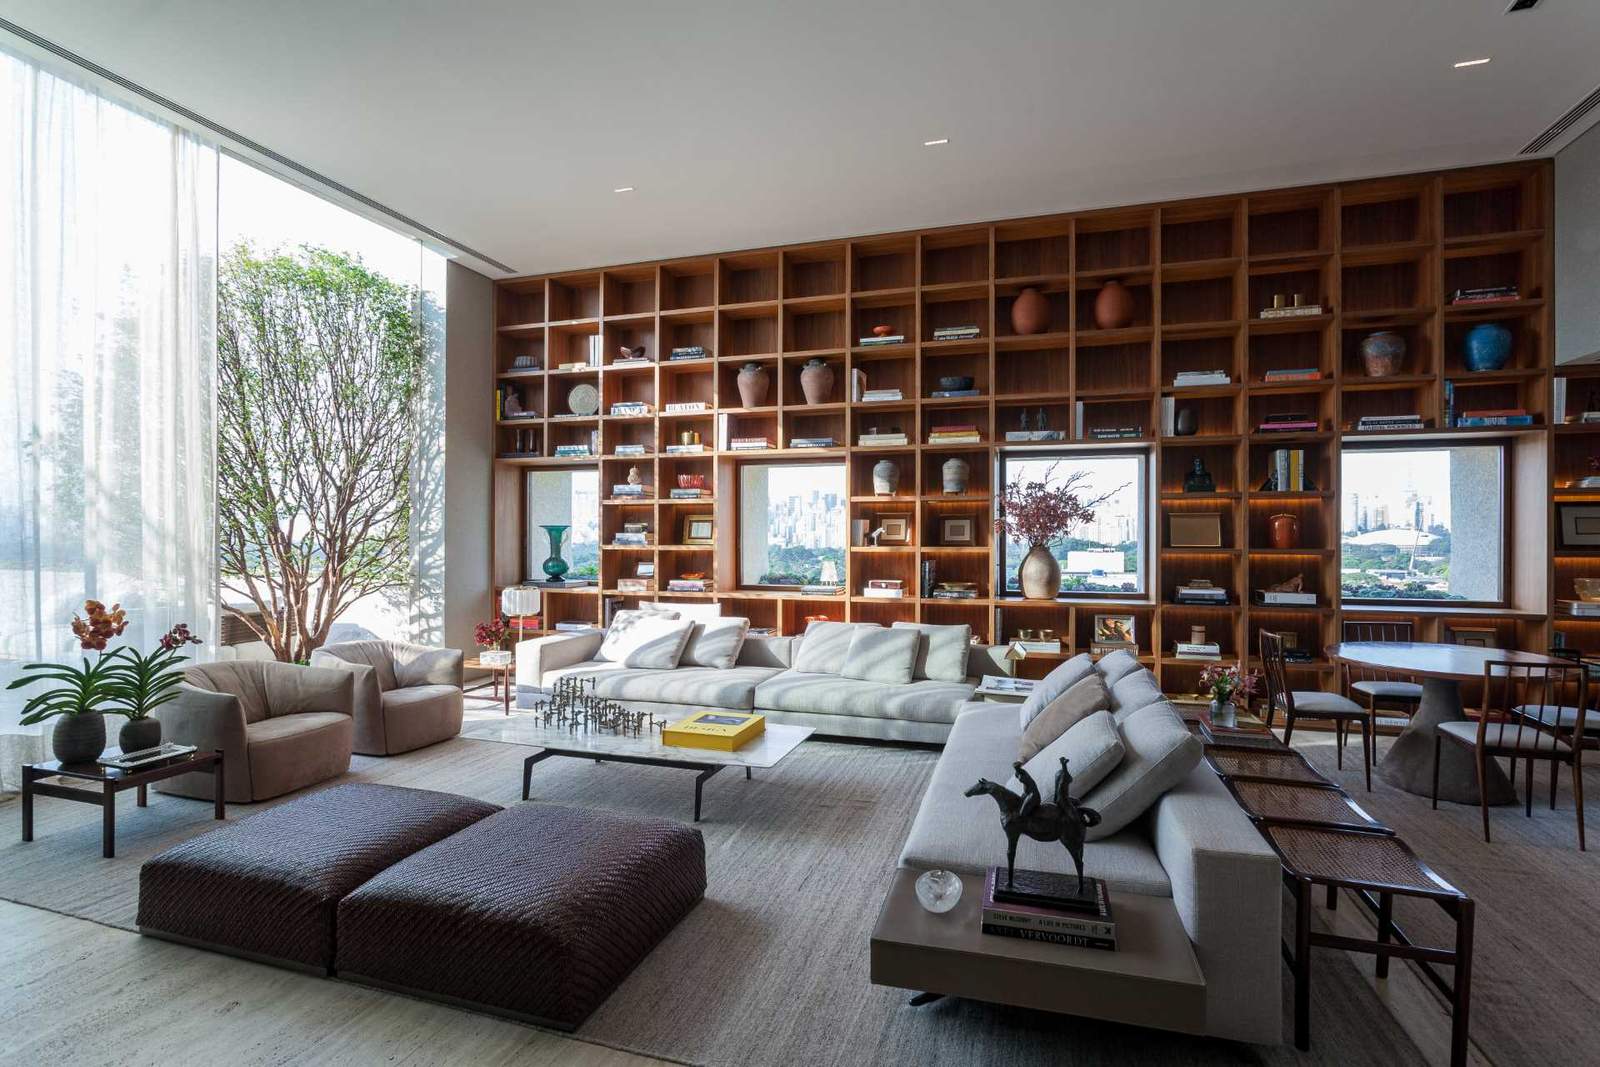 The design of this bookshelf allows the focus to be on the multiple windows that also share the wall, with the shelves framing the windows as if they were paintings.